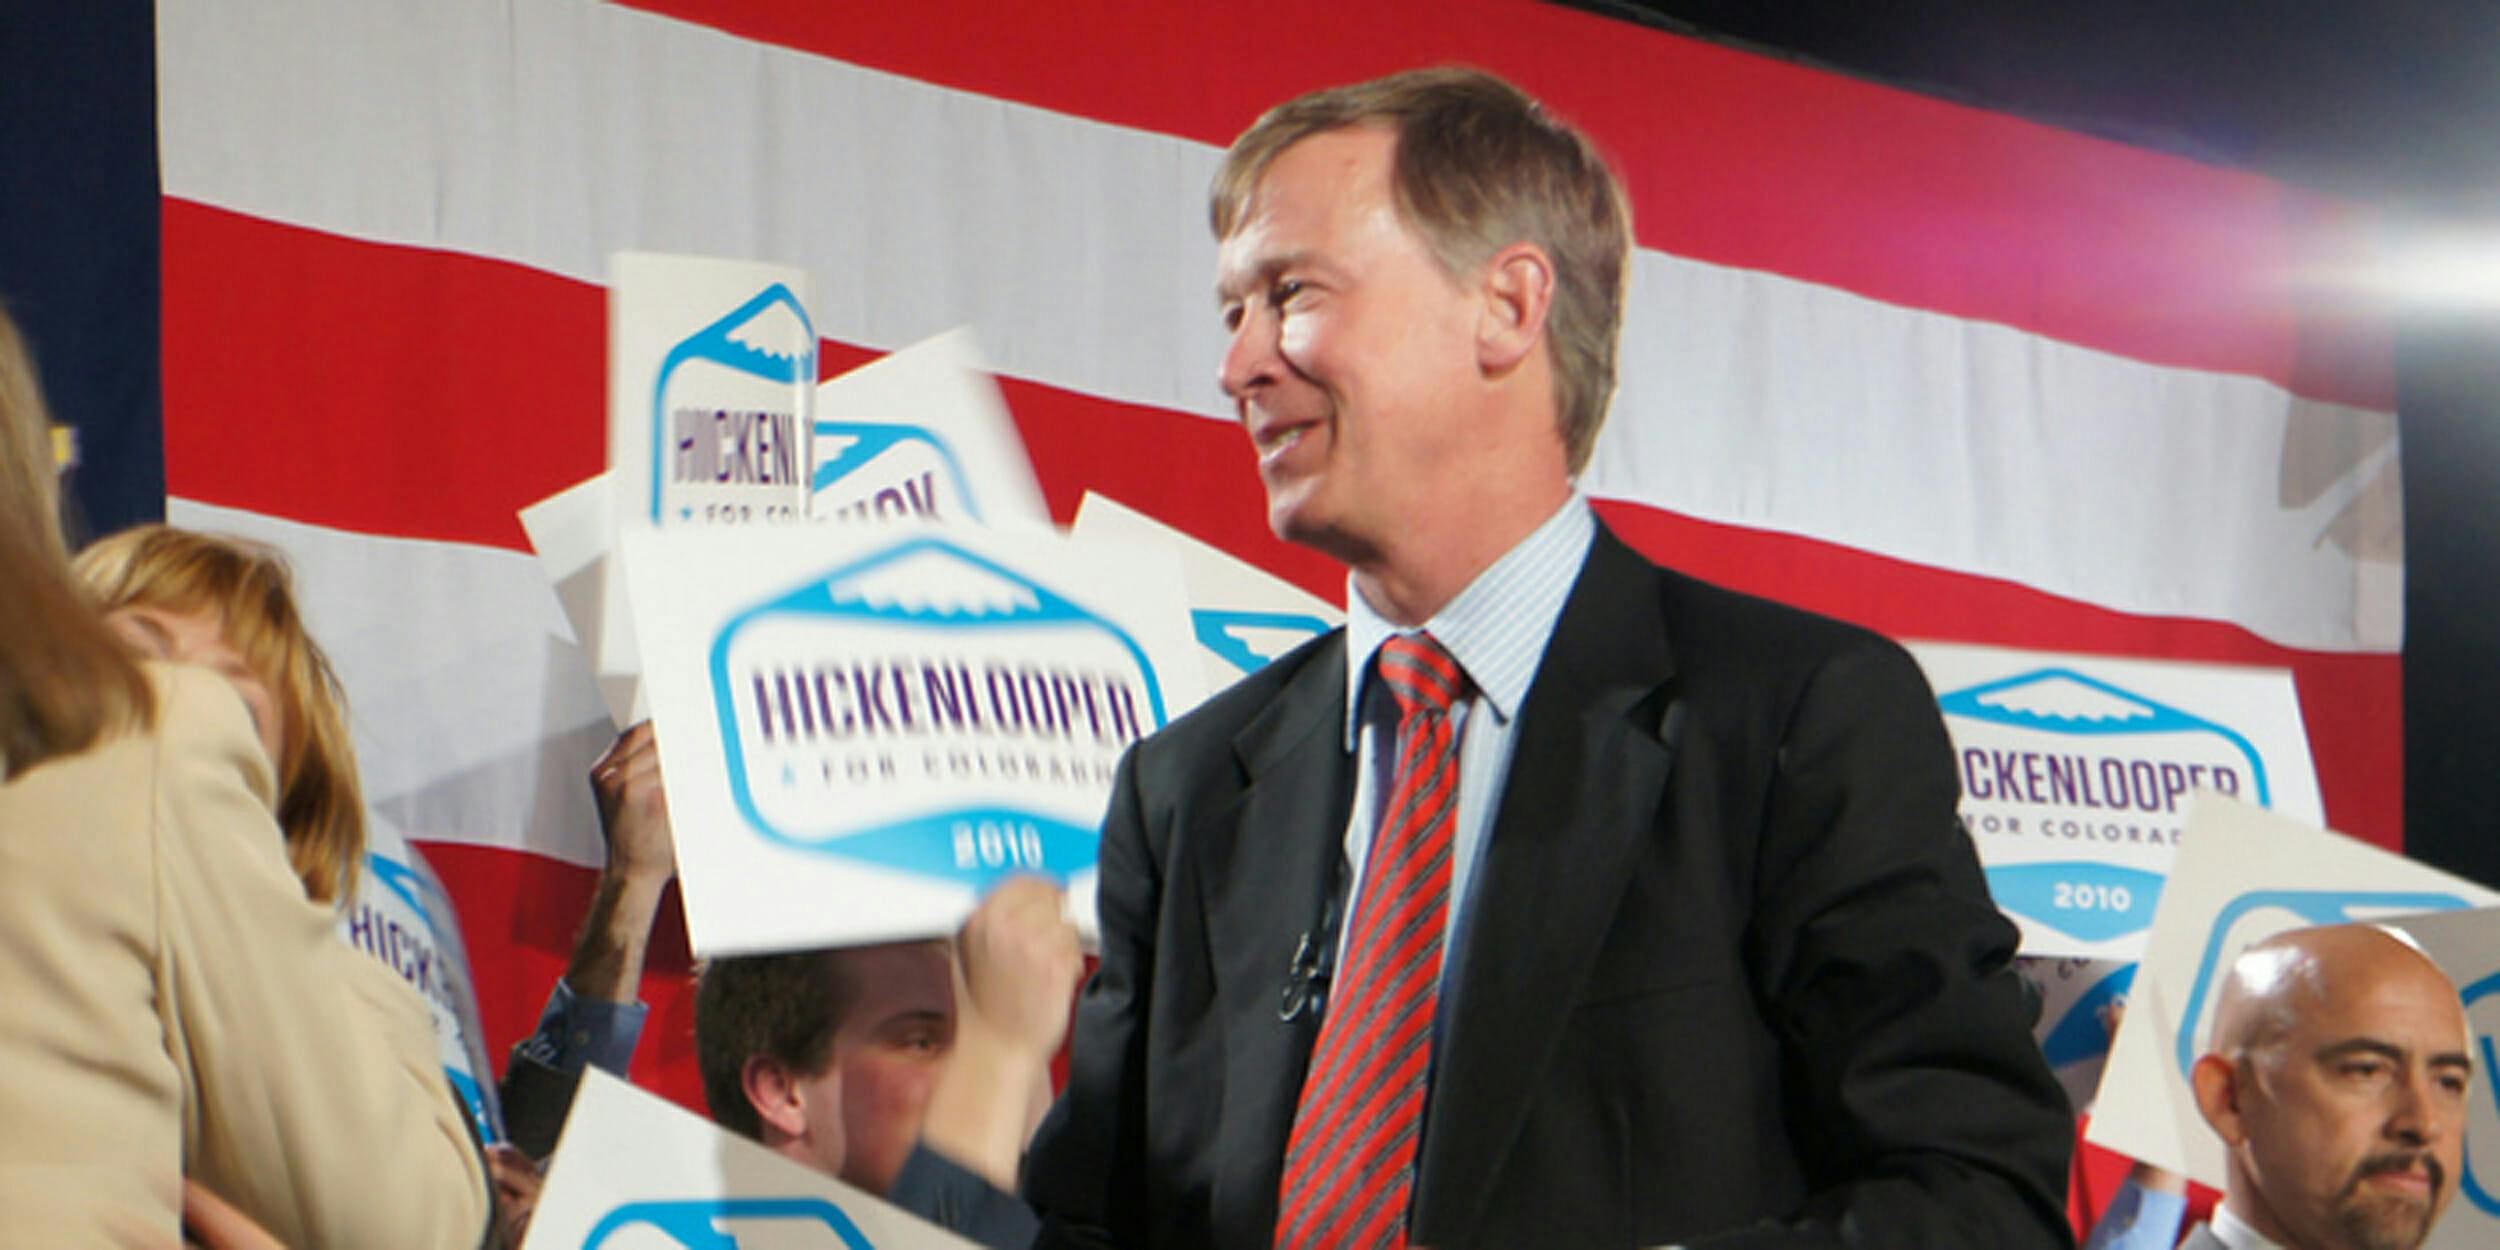 Could John Hickenlooper be a Democratic candidate to face off against Donald Trump in 2020?